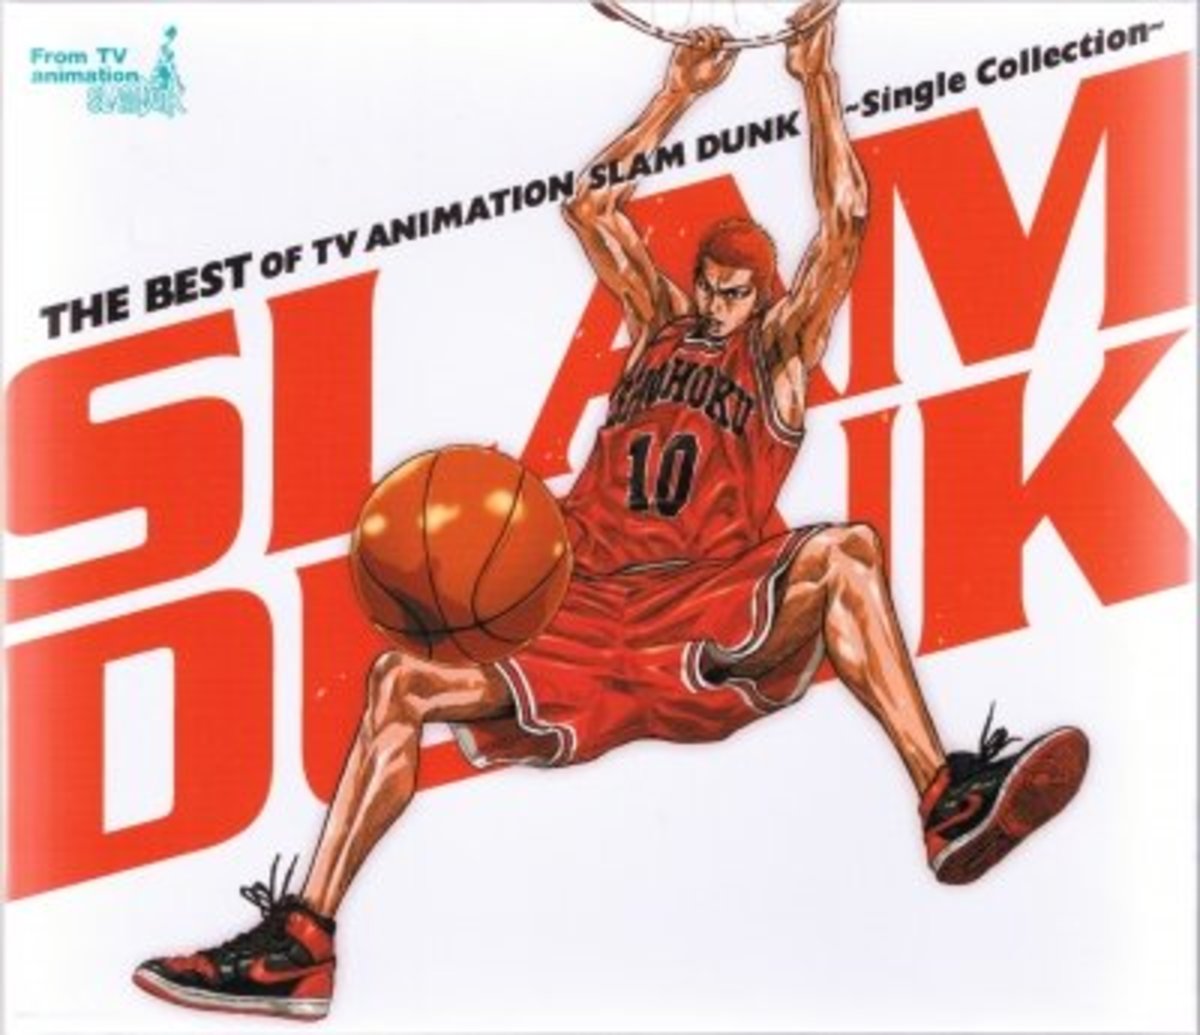 Slam Dunk - The Best of TV Animation Slam Dunk - Single Collection OST